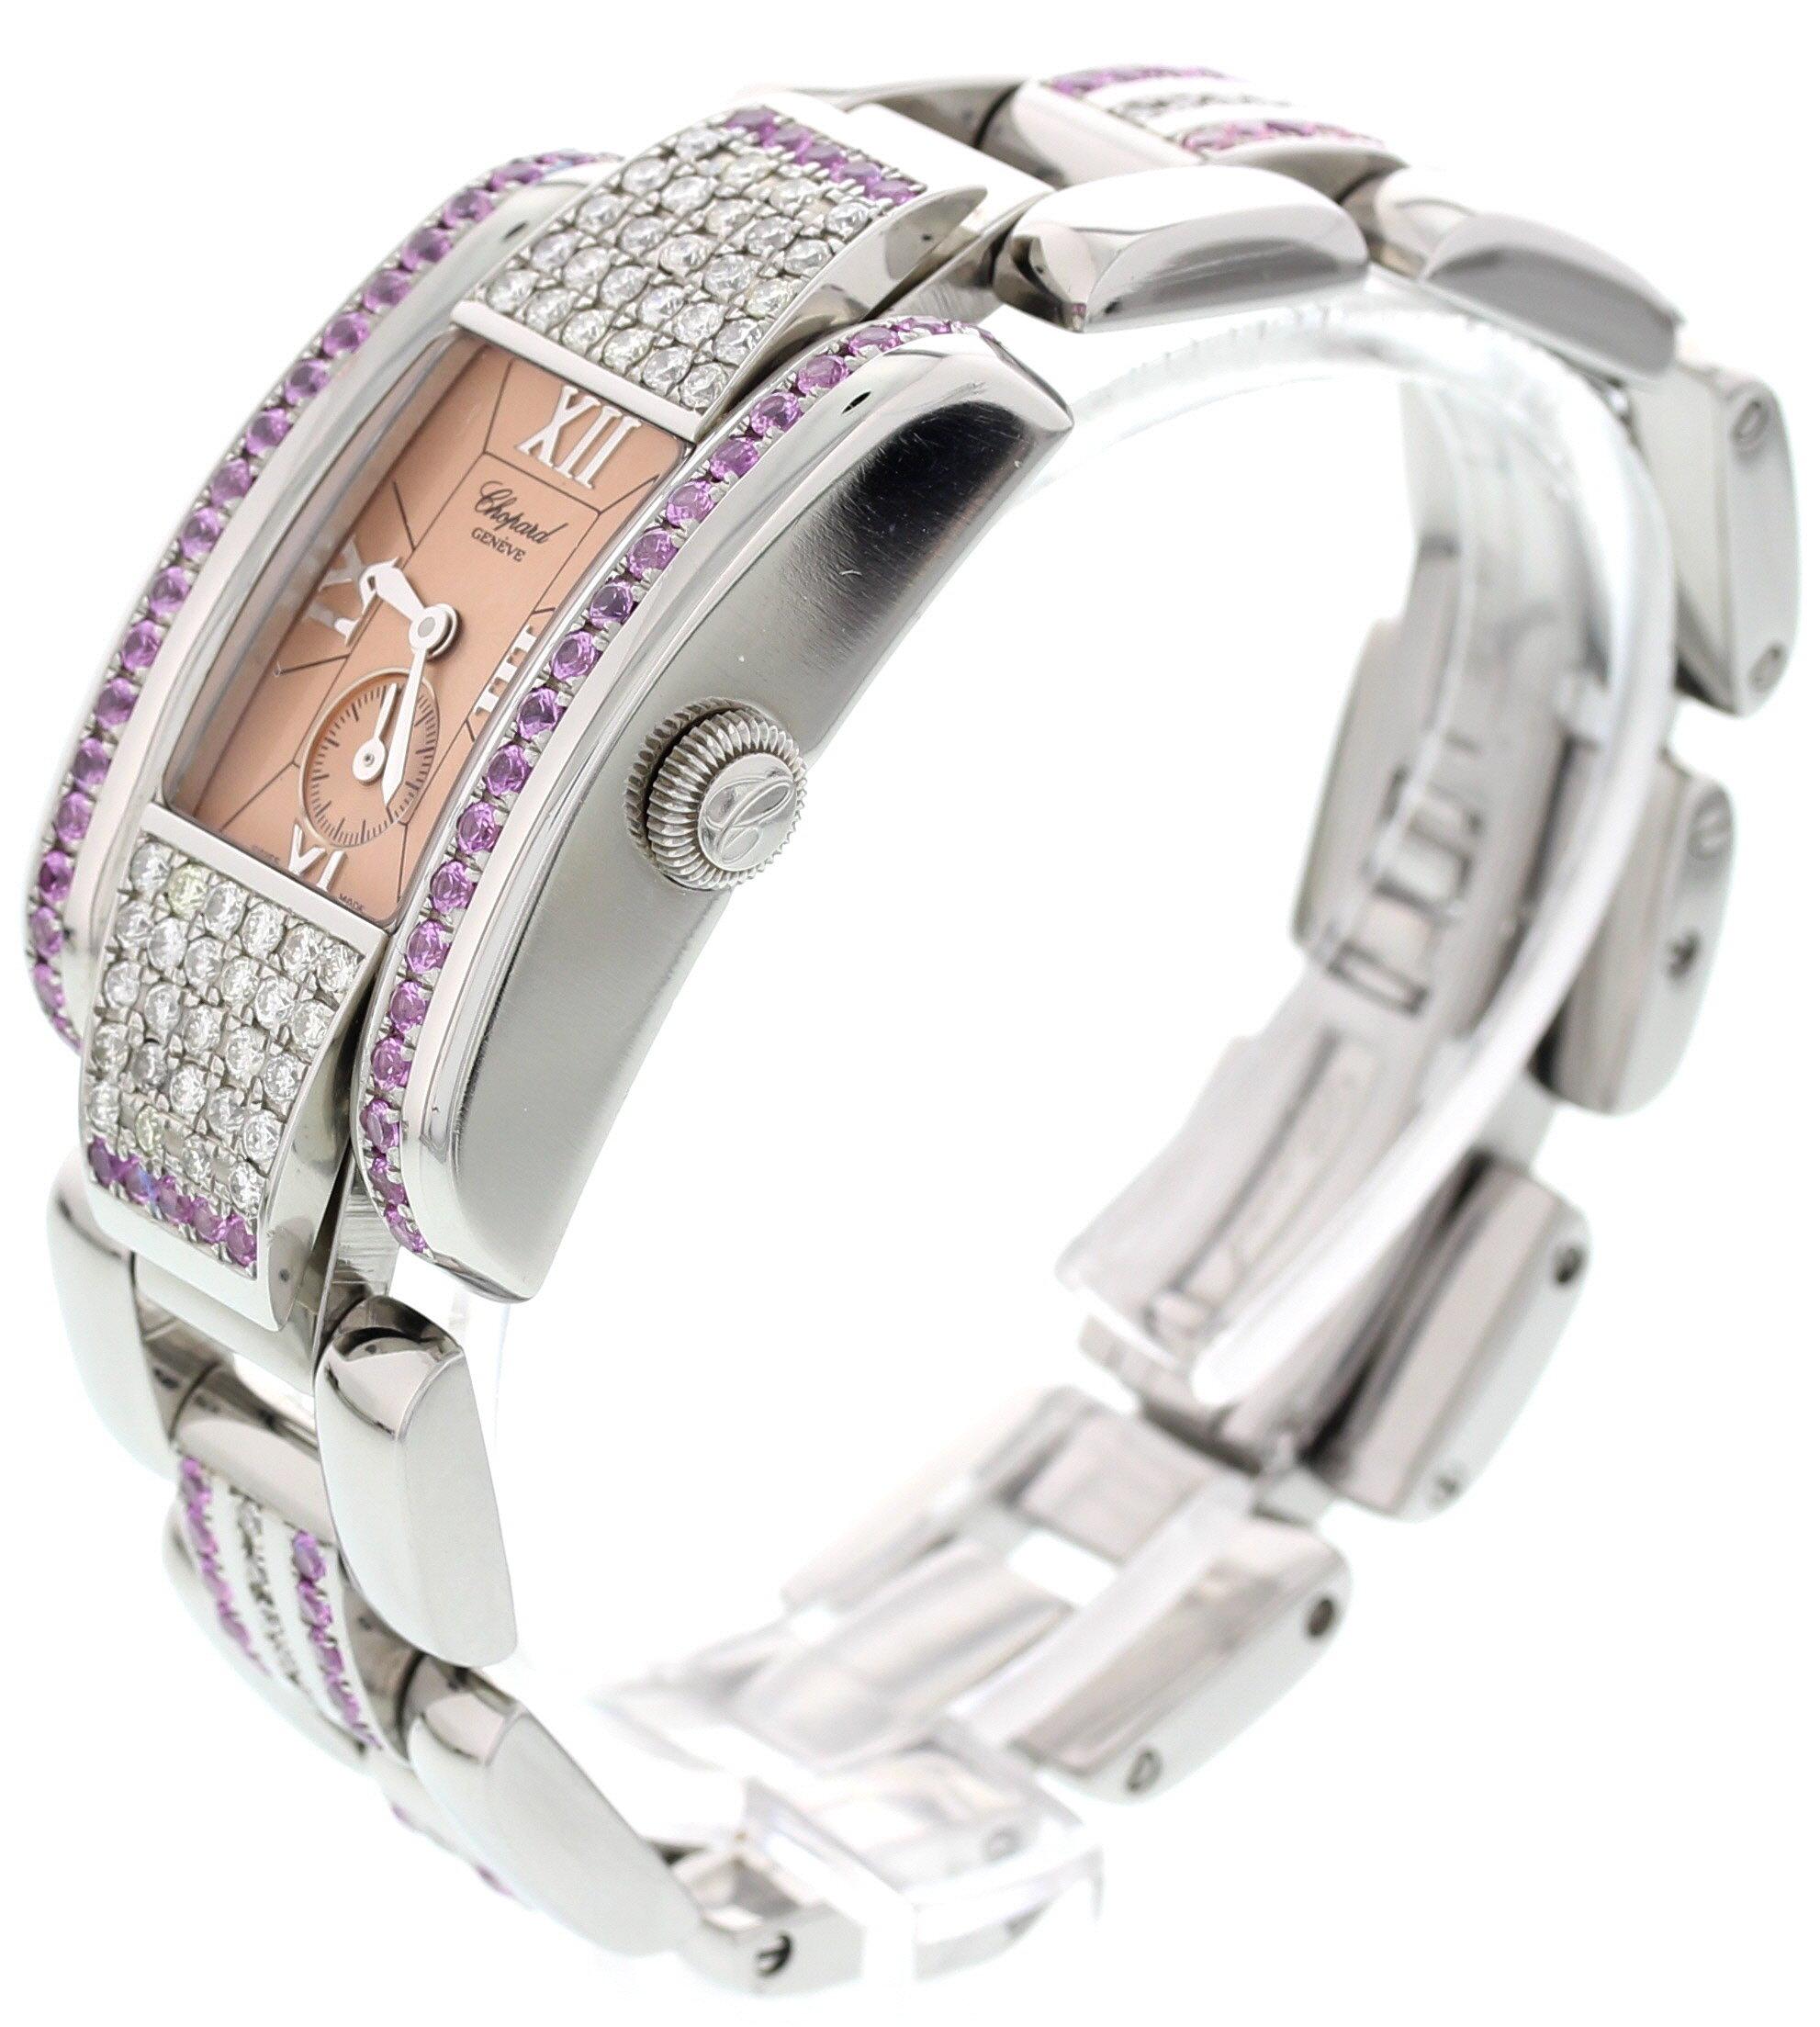 Ladies Chopard La Strada watch. 24 mm stainless steel case with custom set diamonds and pink colored stones.  Pink dial with second sub-dial and roman markers. Stainless steel band with custom set diamonds and a hidden double folding clasp; will fit